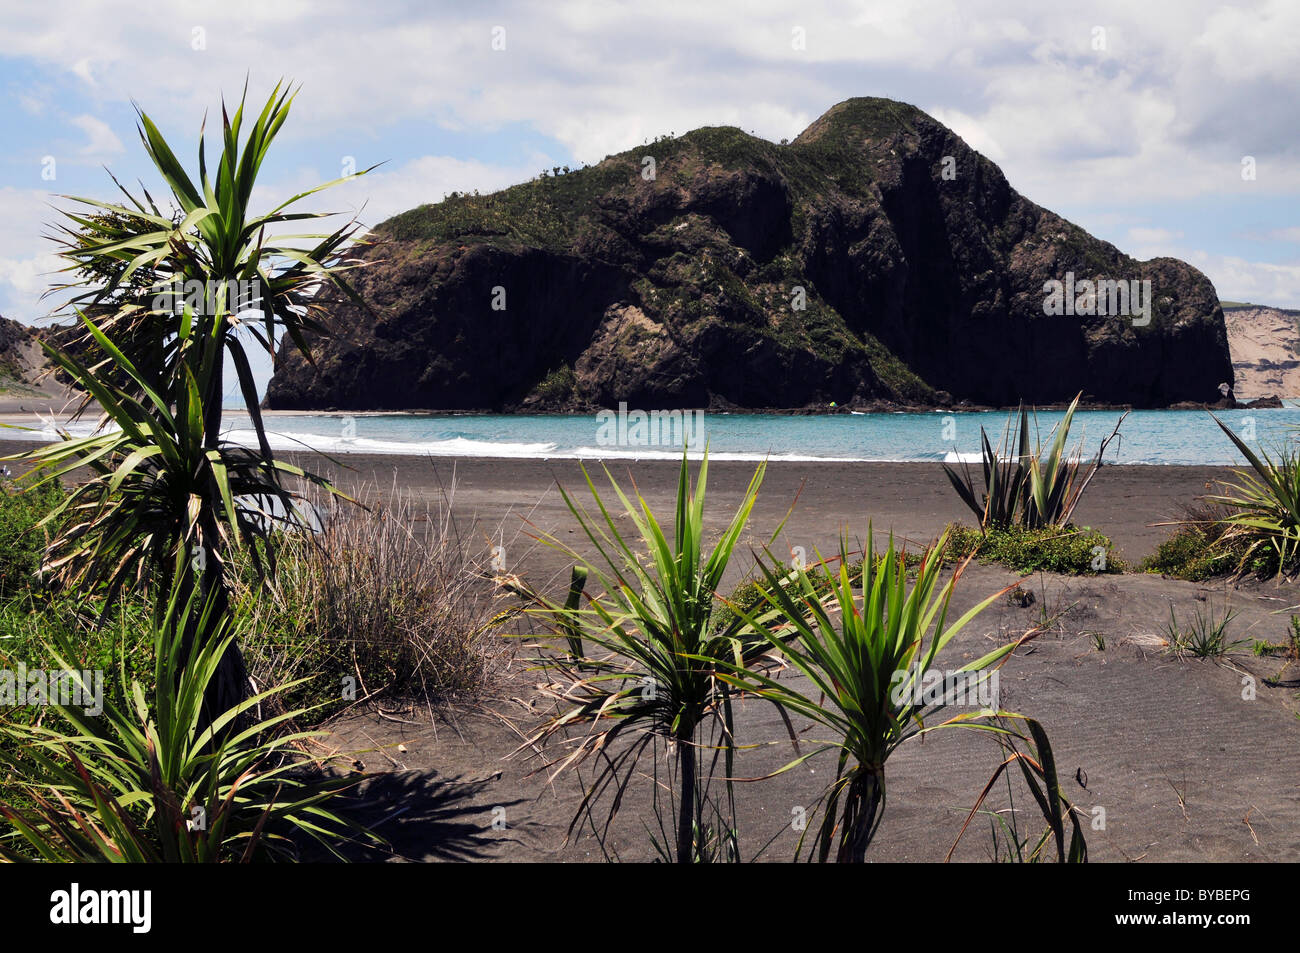 Paratutai Rock at Whatipu in the Waitakere Ranges region of  West Auckland, New Zealand, by the Tasman Sea Stock Photo